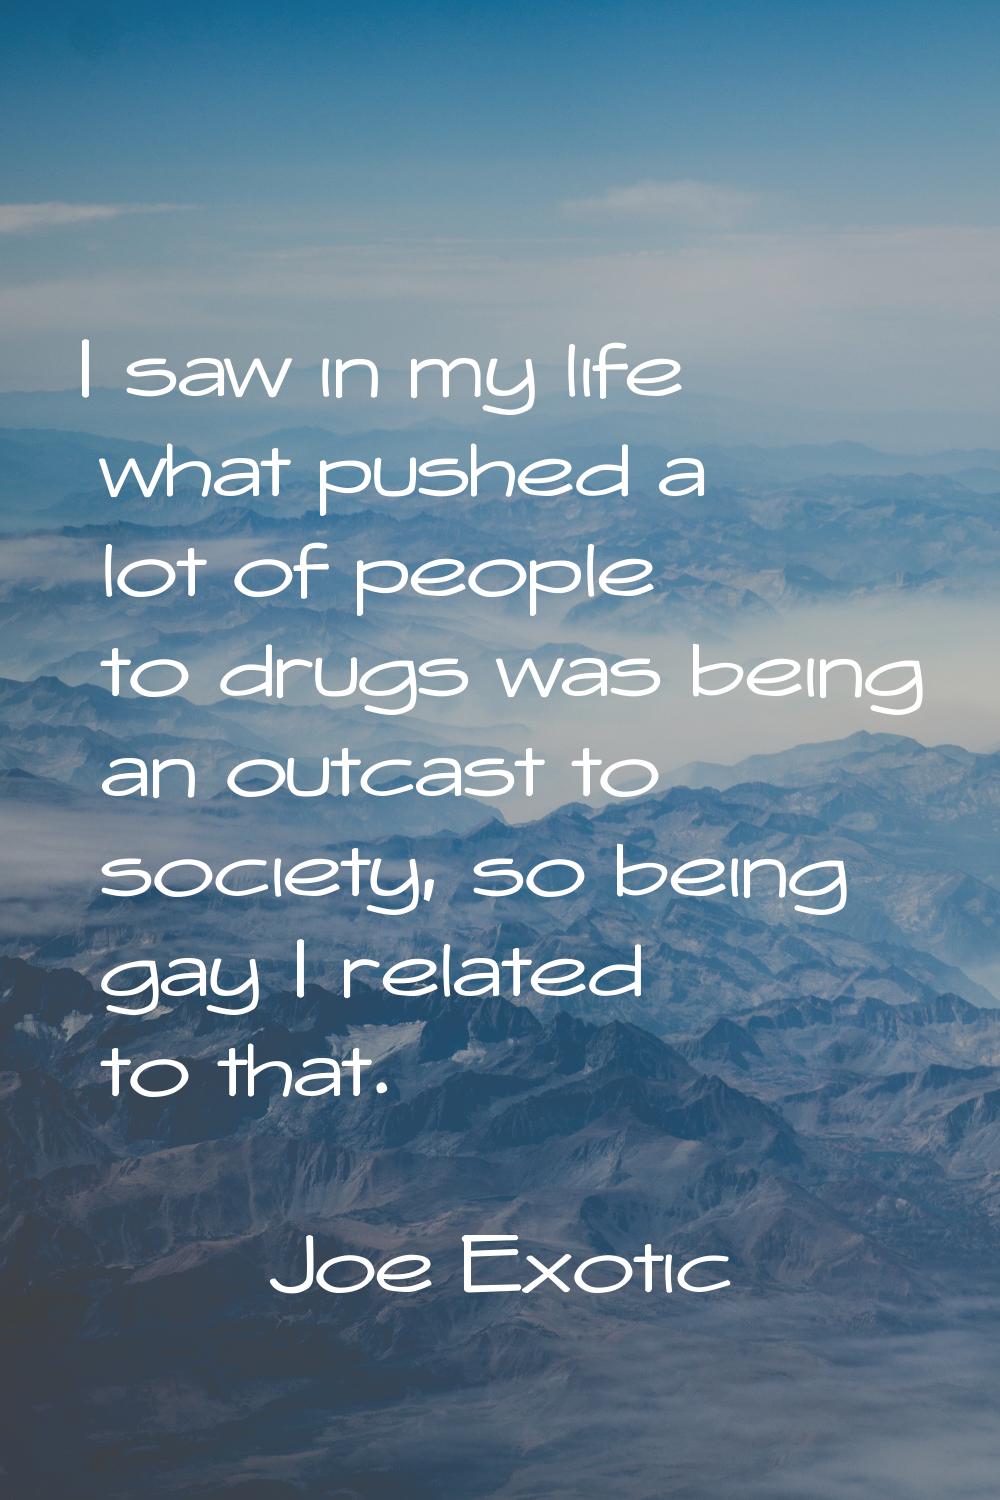 I saw in my life what pushed a lot of people to drugs was being an outcast to society, so being gay